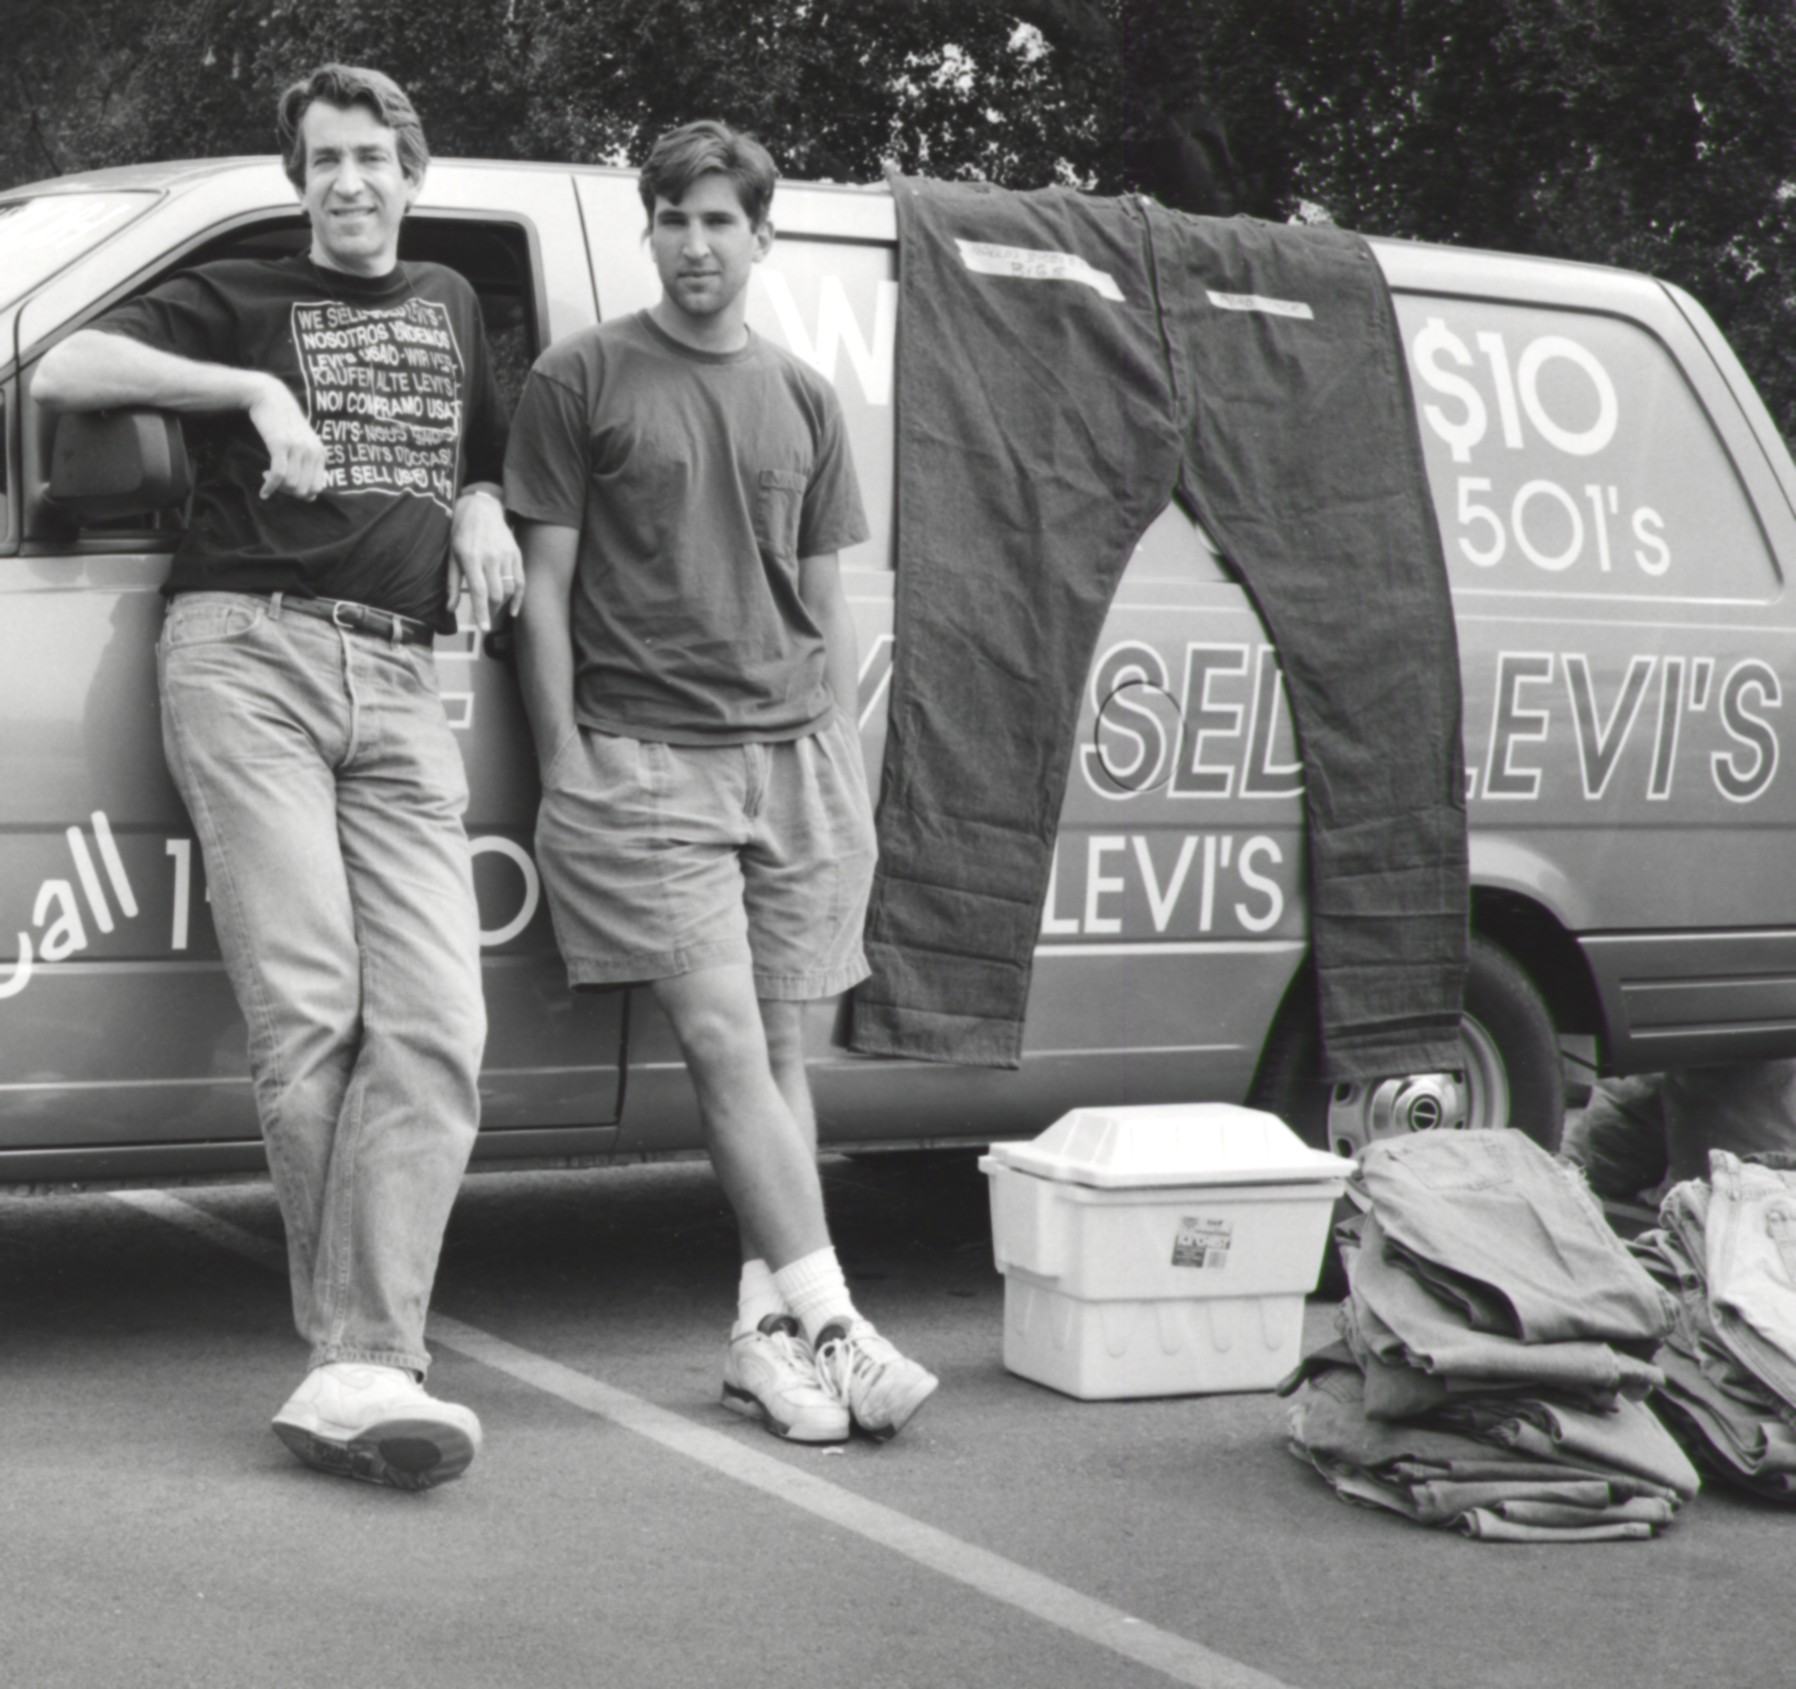 Father &amp; Son Selling Levi's - Pasadena CA 1993